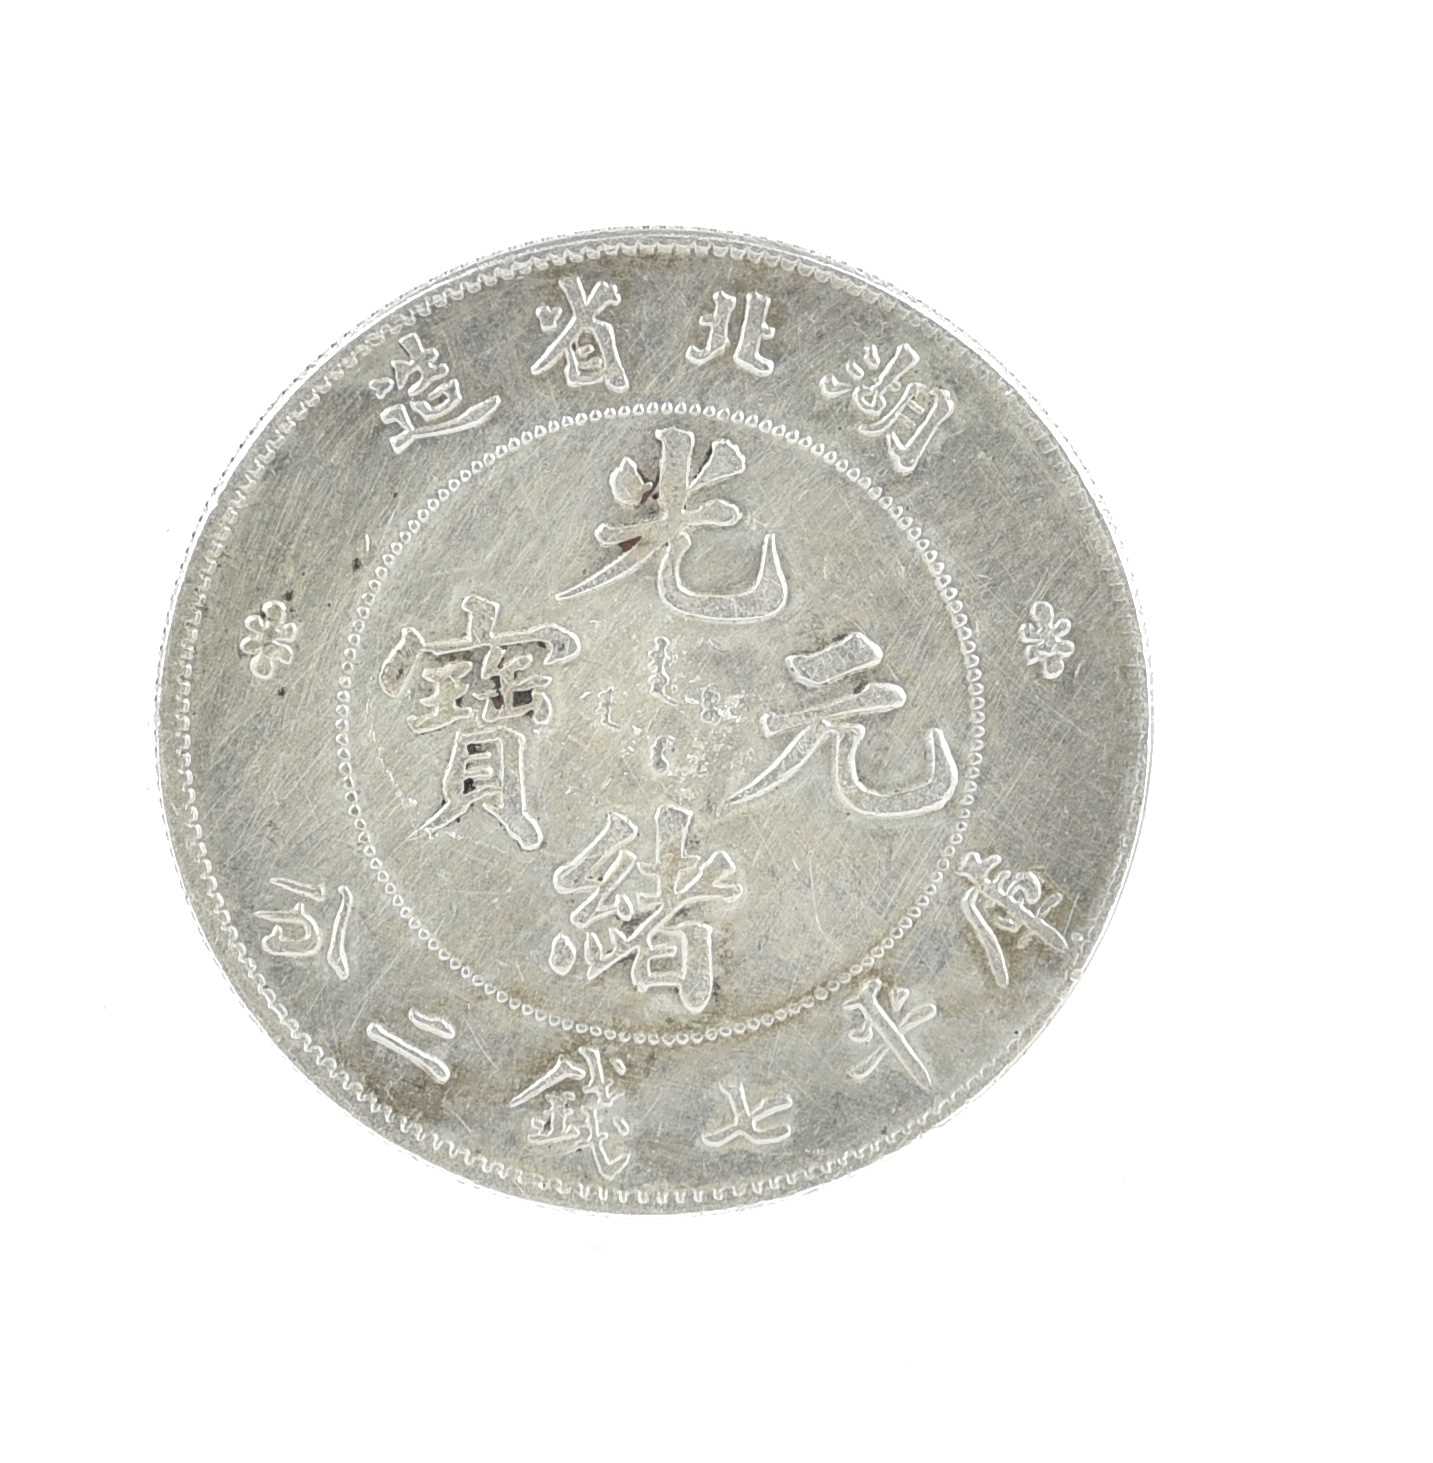 China - Empire: Hubei, Guangxu, silver dollar, undated (1895-1907), (KM Y127.1), extremely fine or - Image 2 of 2